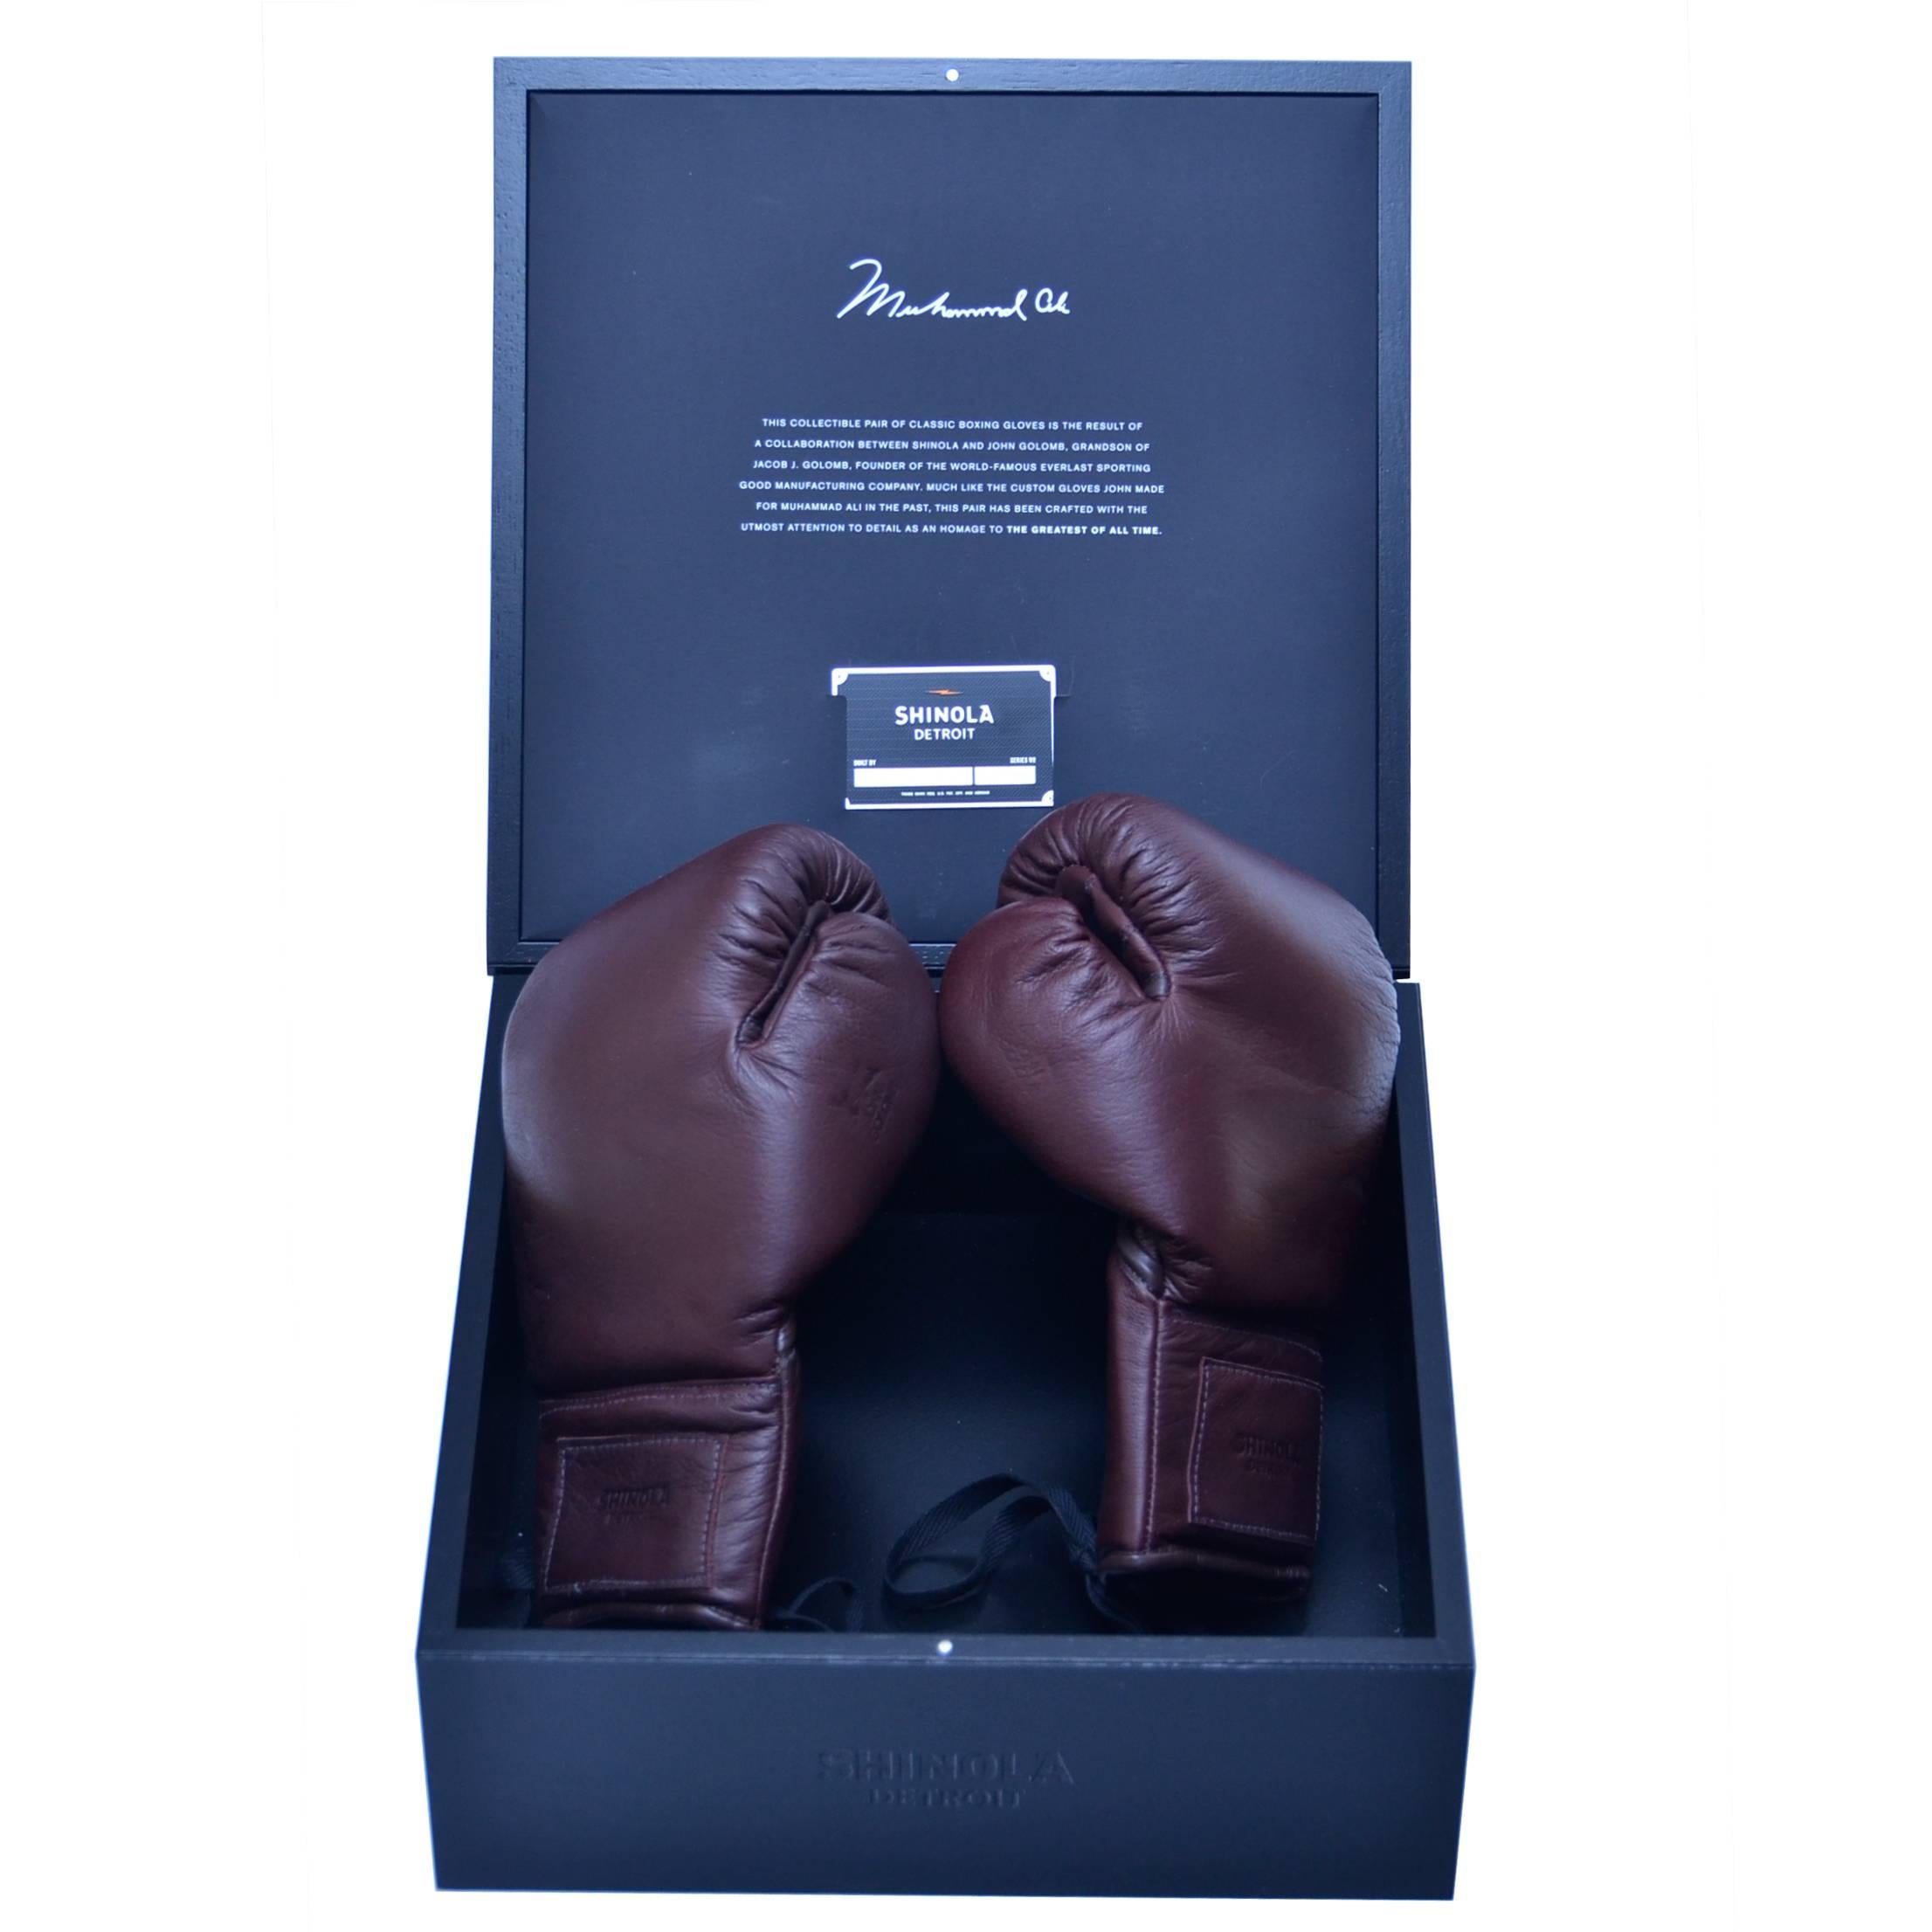  Muhammad Ali  Shinola’s   Collection Leather  Boxing Gloves 